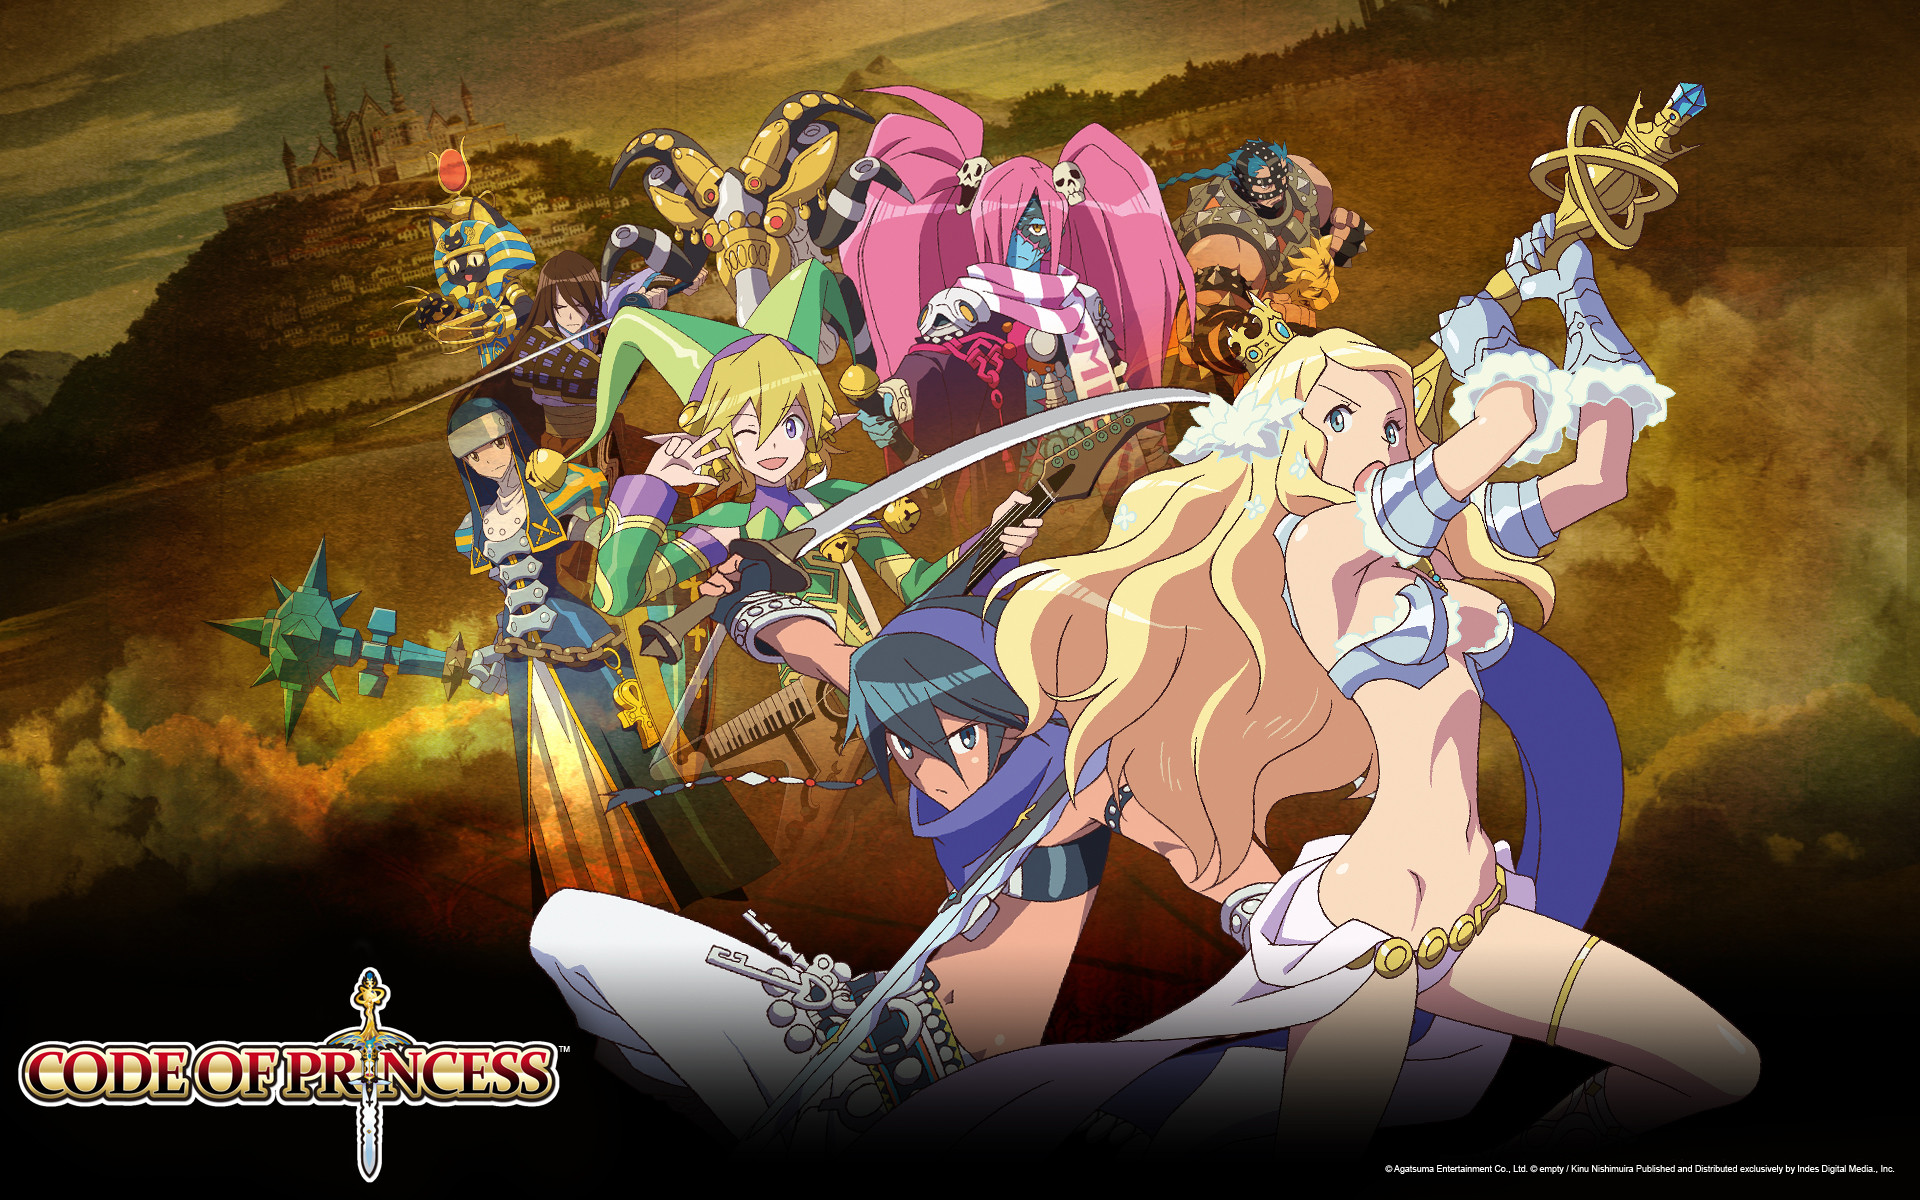 Code of Princess, the 3D beat em up / RPG for Nintendo 3DS Available Now